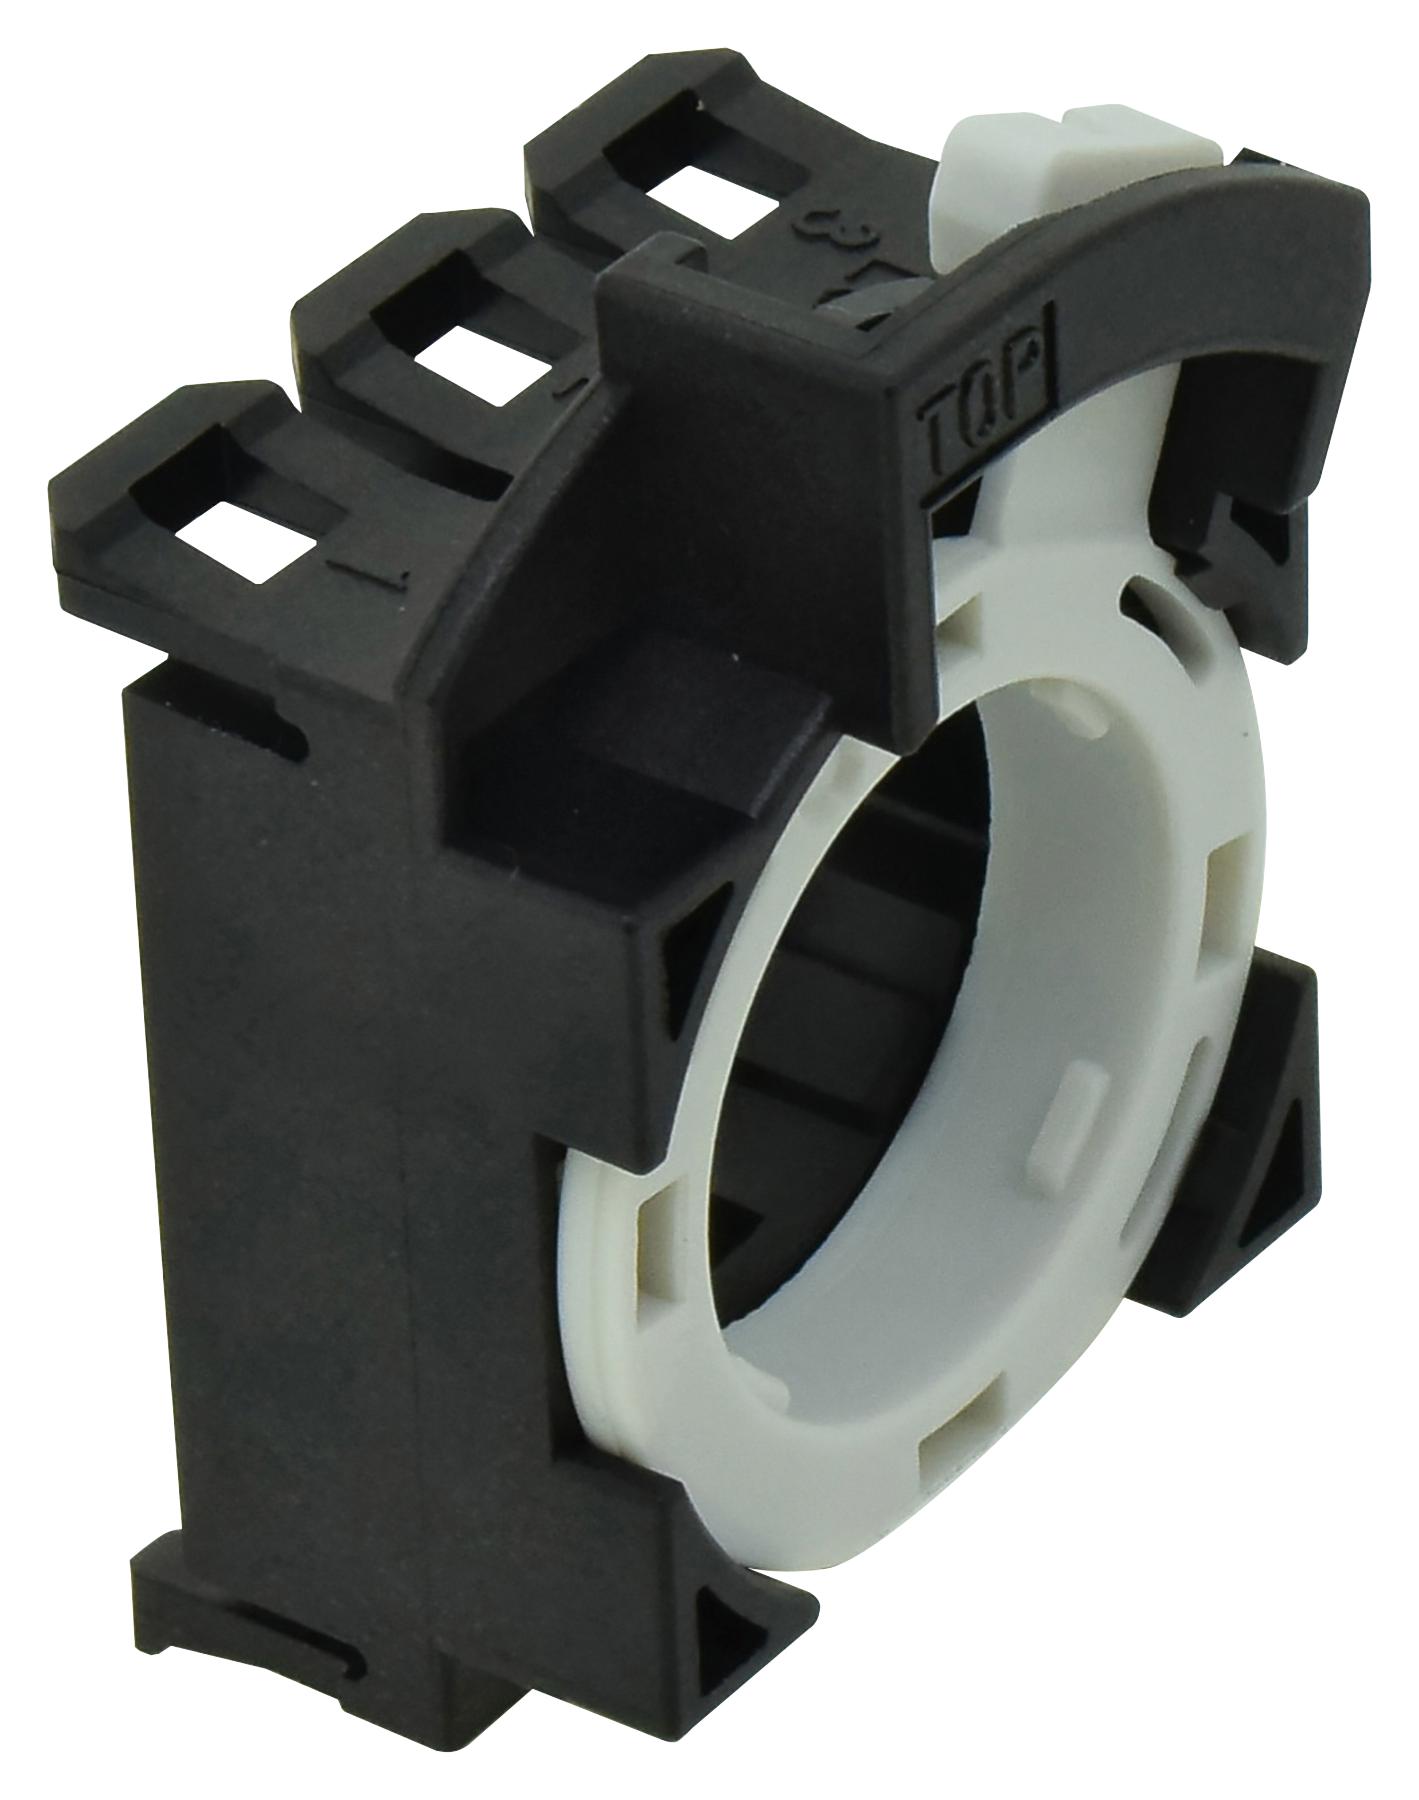 HW-CNP CONTACT BLOCK MOUNTING ADAPTOR, SWITCH IDEC